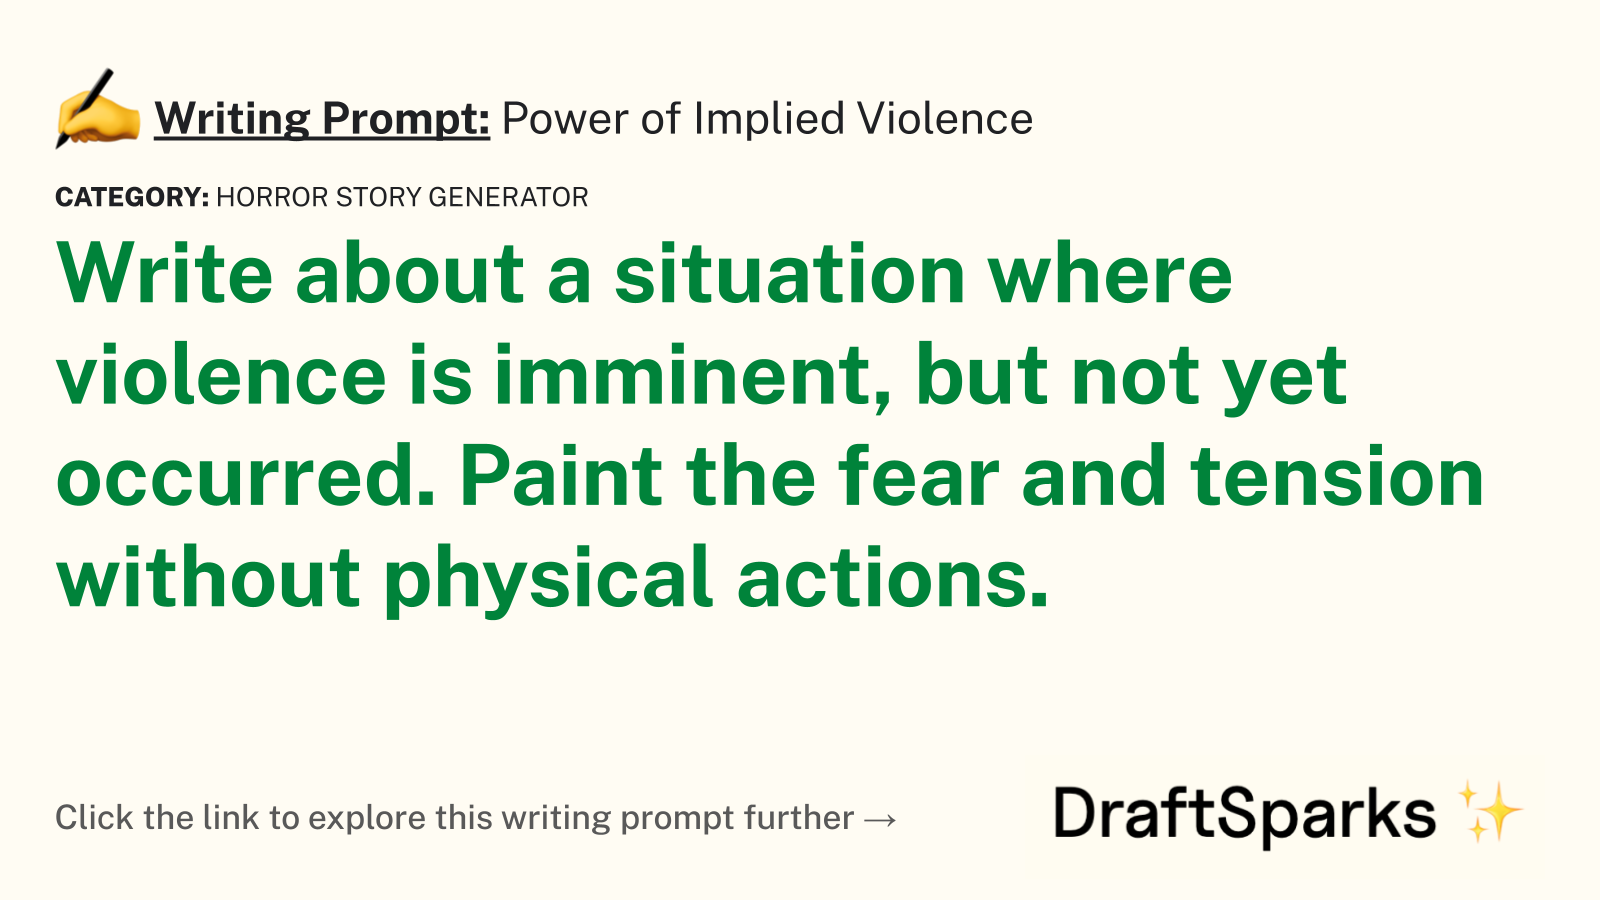 Power of Implied Violence